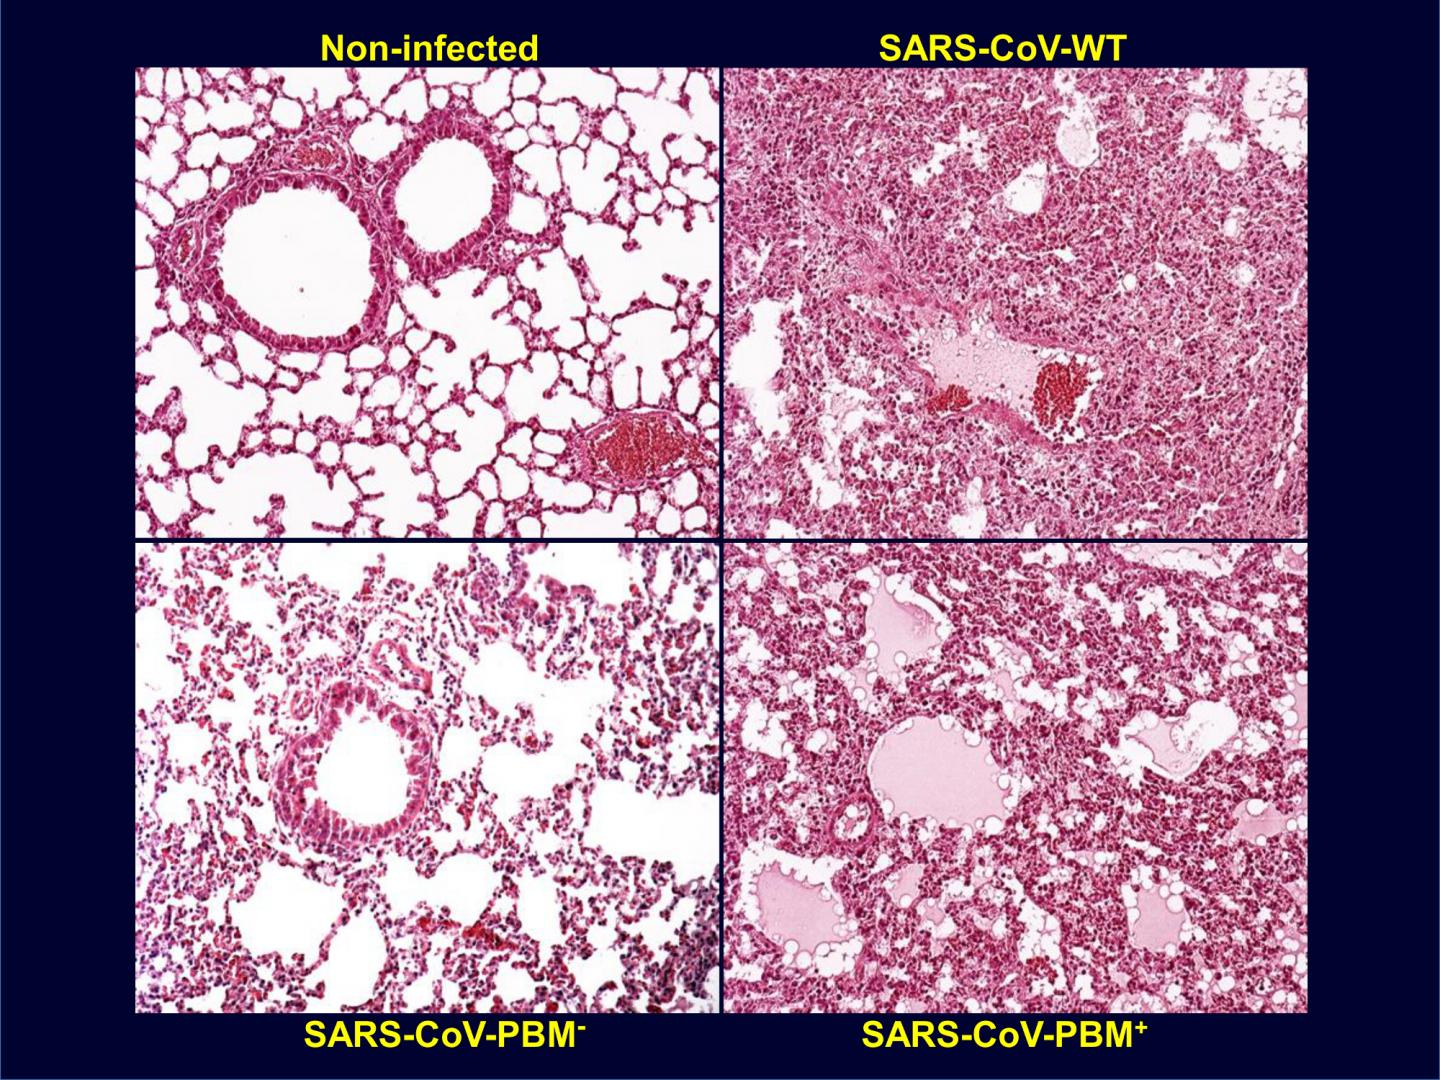 Lung Pathology of Mice Infected with SARS-CoV With or Without E Protein PBM